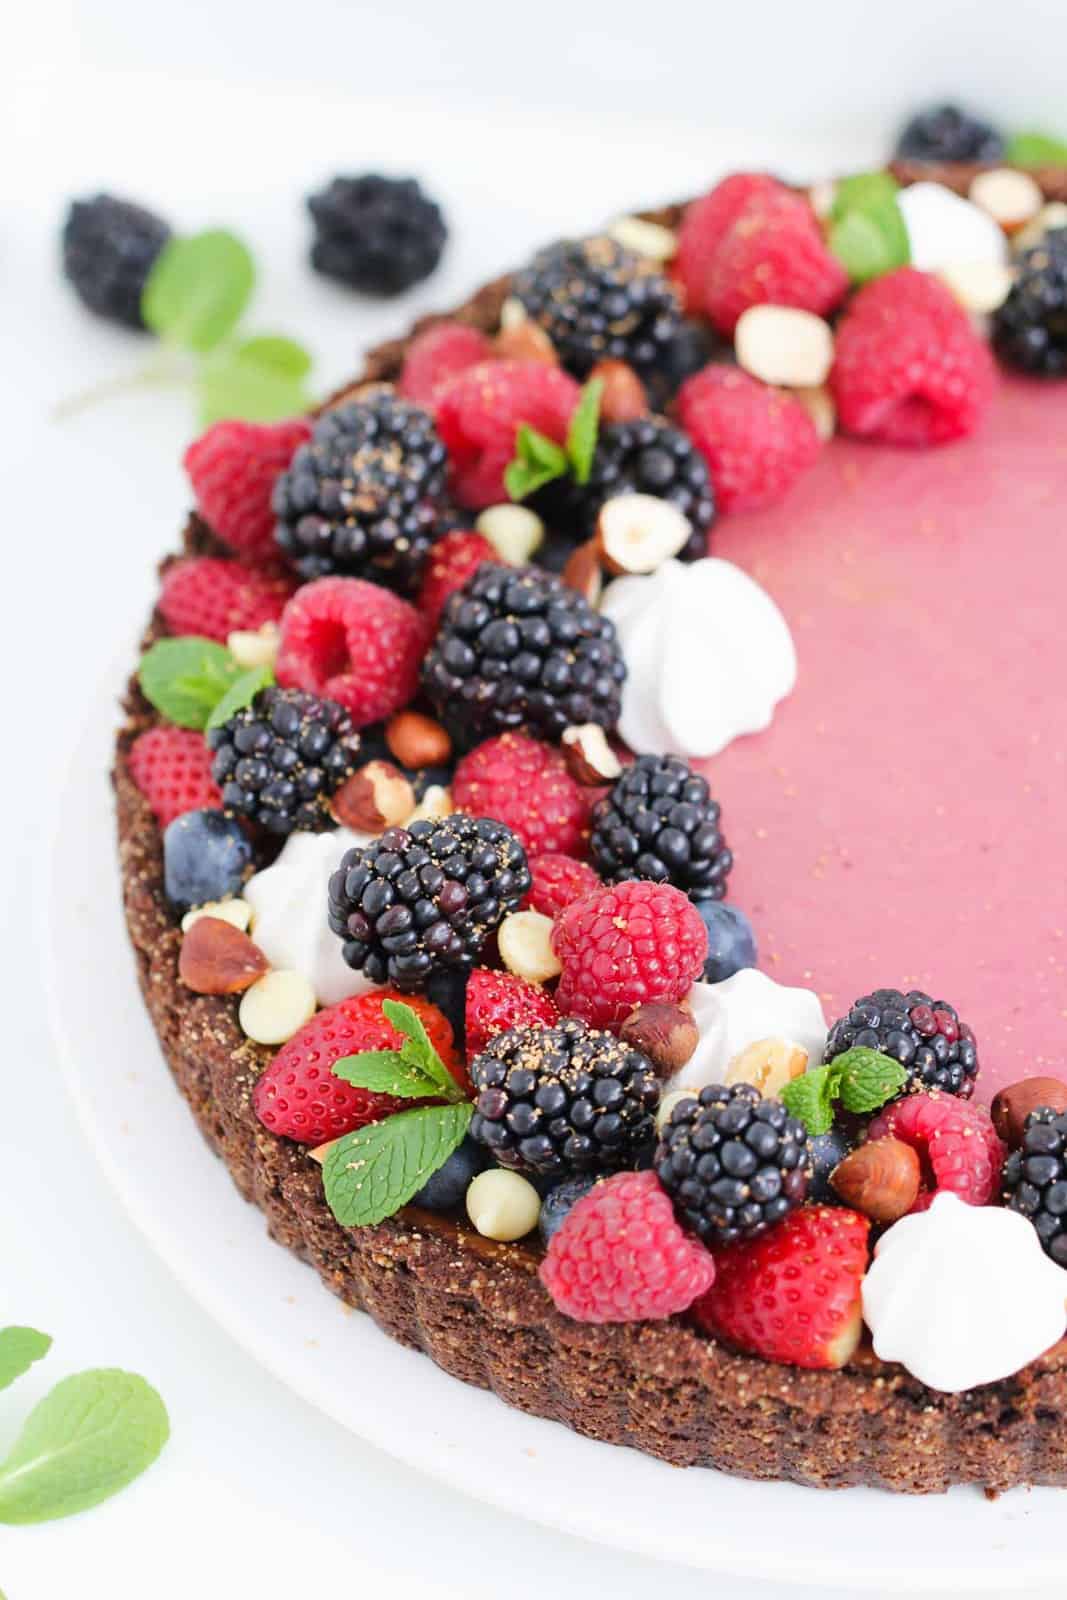 A Blackberry Cheesecake Tart decorated with blackberries and raspberries